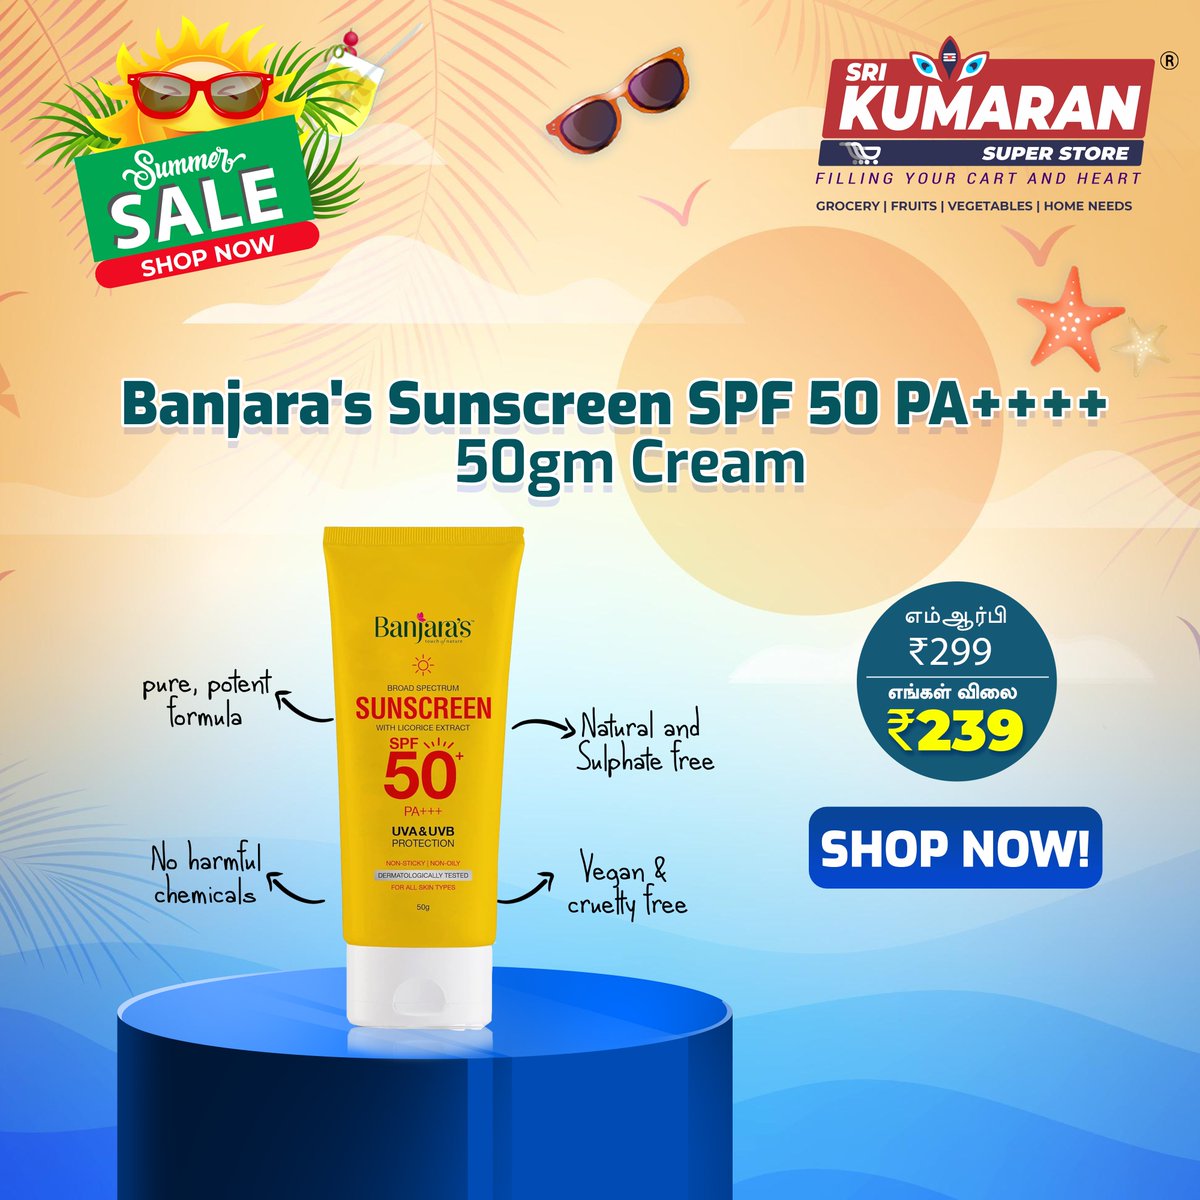 Stay safe under the sun with Banjara's Sunscreen SPF50++++! Available now in a convenient 50g size at Sri Kumaran Super Store. Don't miss out on this summer essential! 🌞💆🏻‍♀️

#SummerSale  #SunCare #SkinProtection #sunscreen #srikumaransuperstore #pollachi #grocery #supermarket